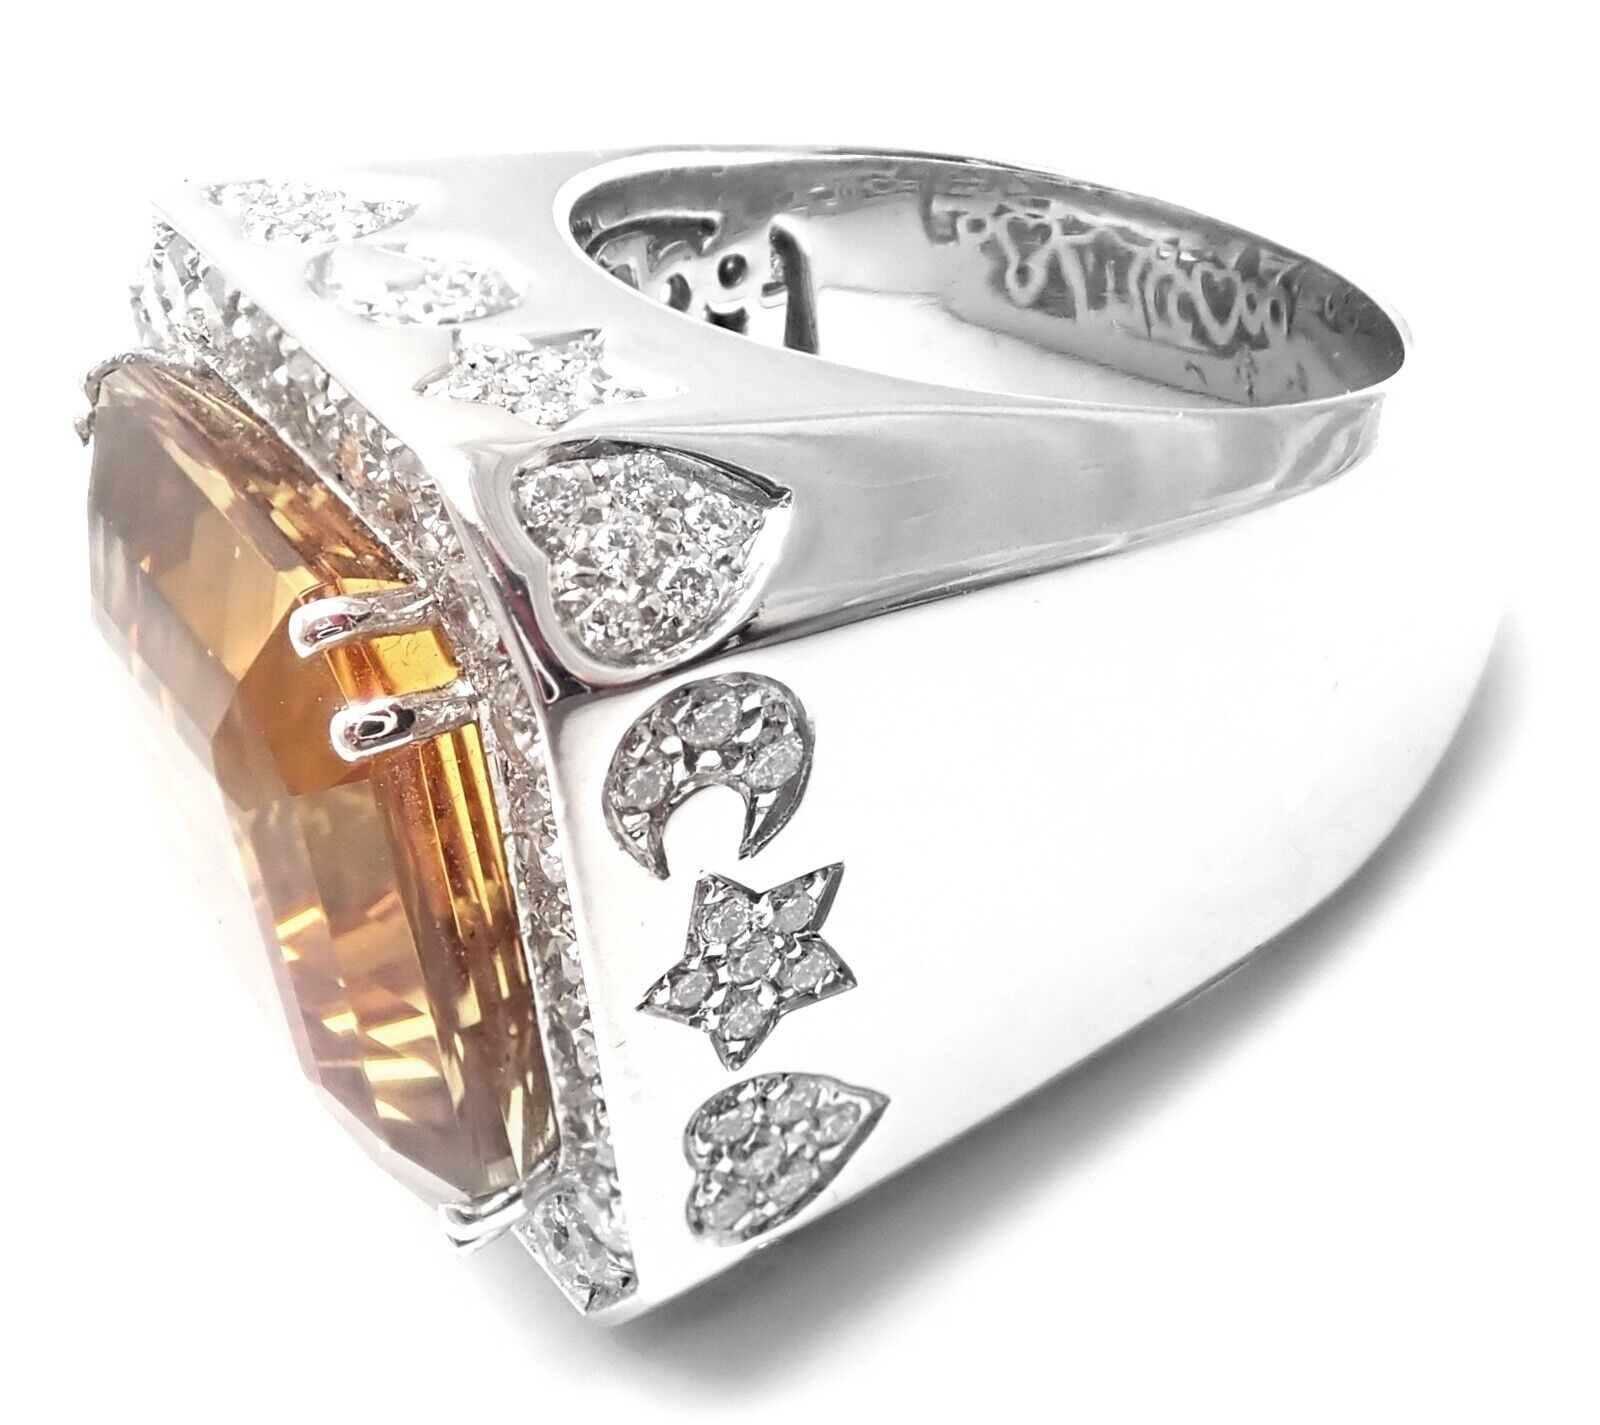 PASQUALE BRUNI Jewelry & Watches:Fine Jewelry:Rings Authentic! Pasquale Bruni 18k White Gold Diamond Citrine Large Ring